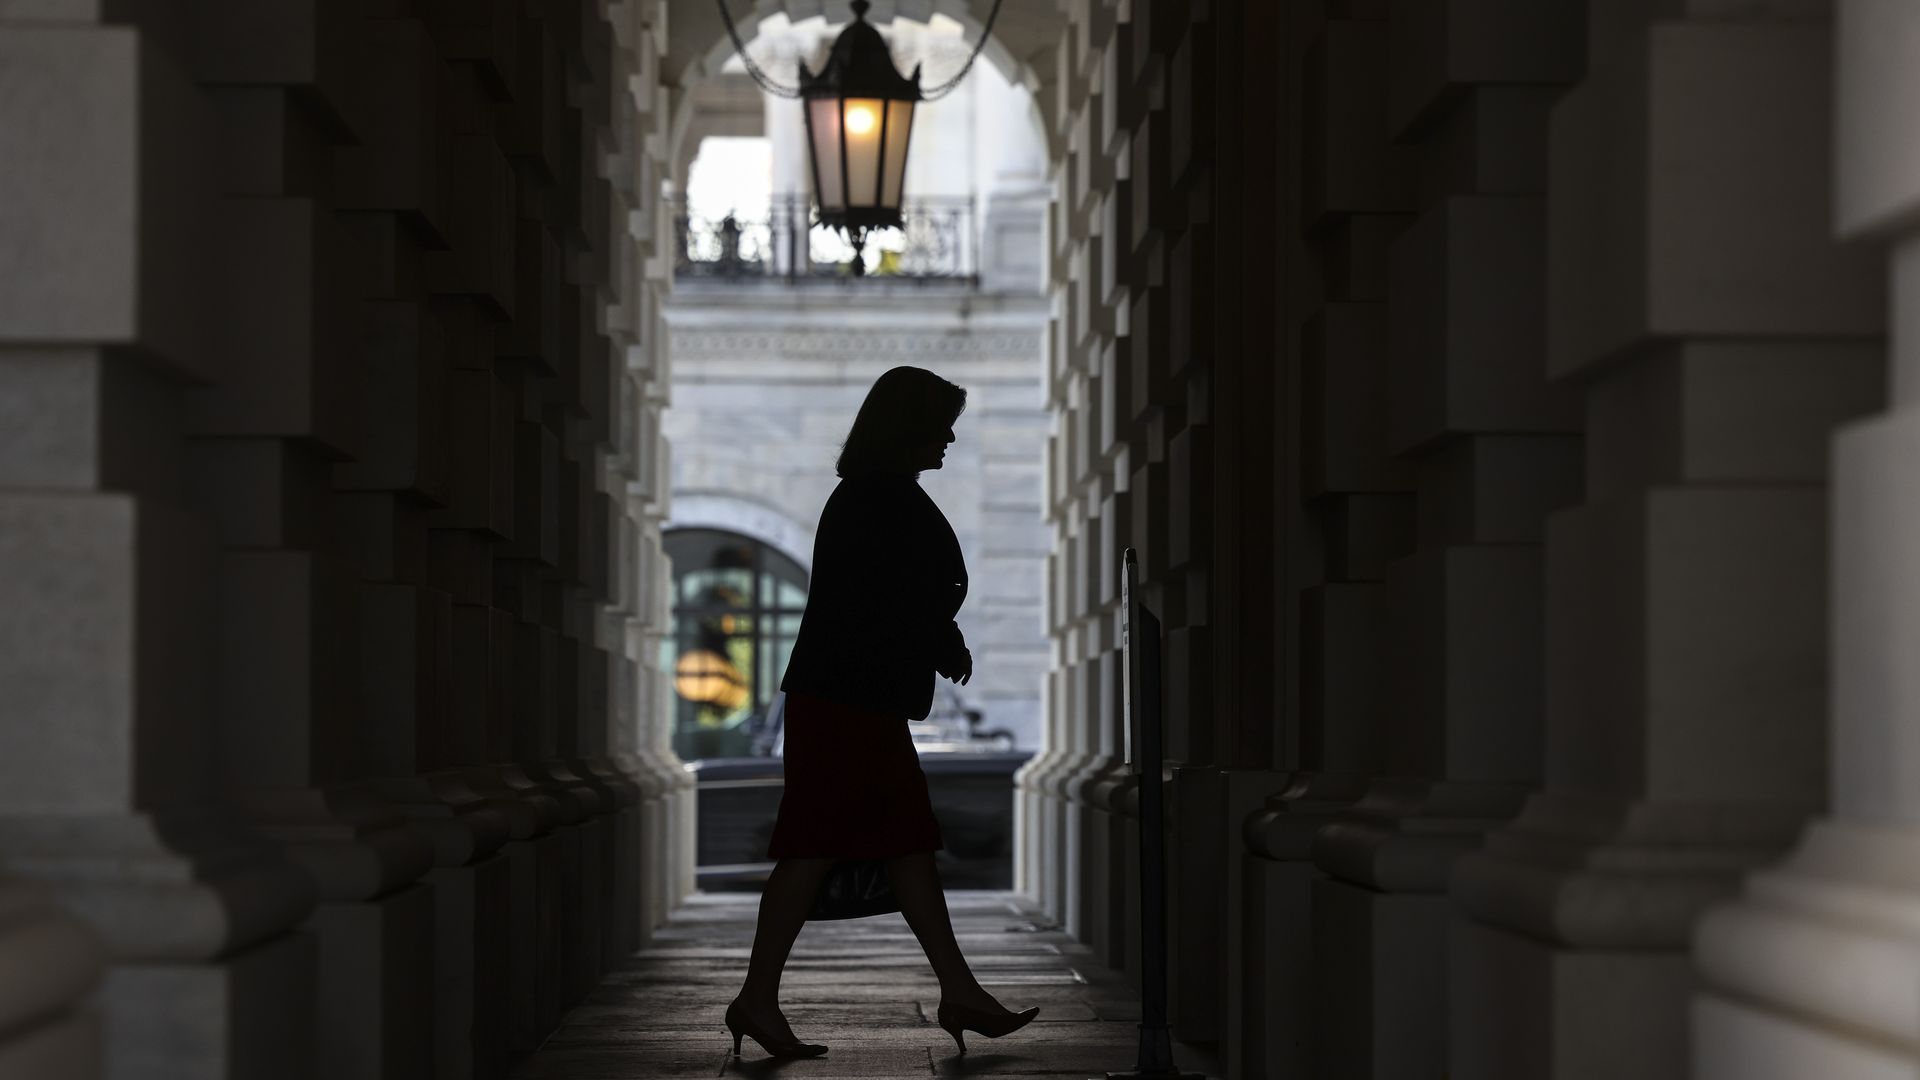 Sen. Joni Ernst is seen in silhouette arriving at the U.S. Capitol.